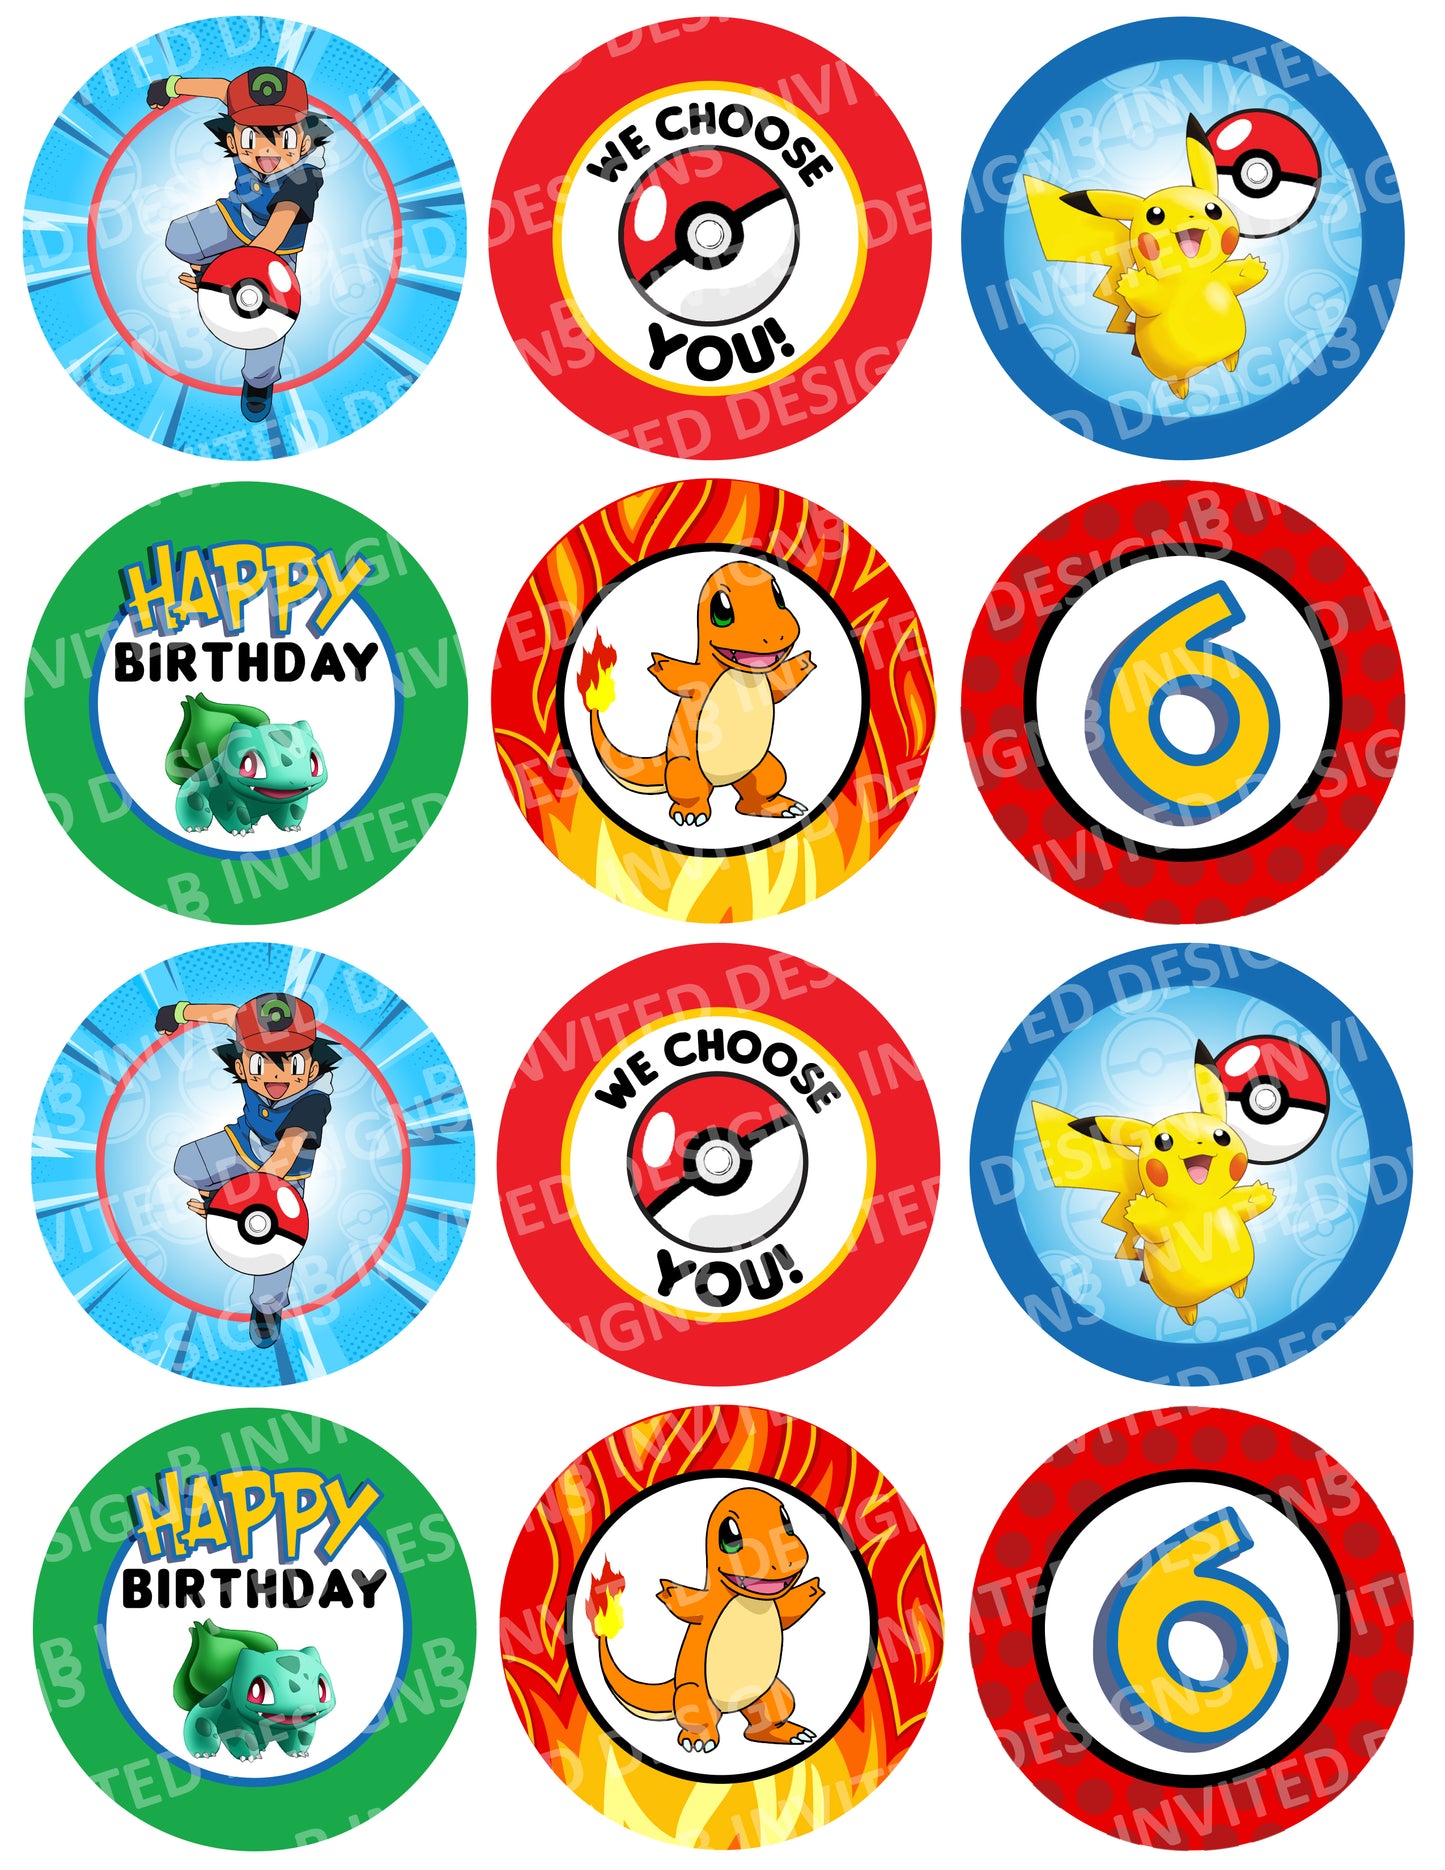 POKEMON Pikachu Party Cupcake Toppers! 2 Inch or 2.5 Inch! Digital OR Printed & Fully Assembled!